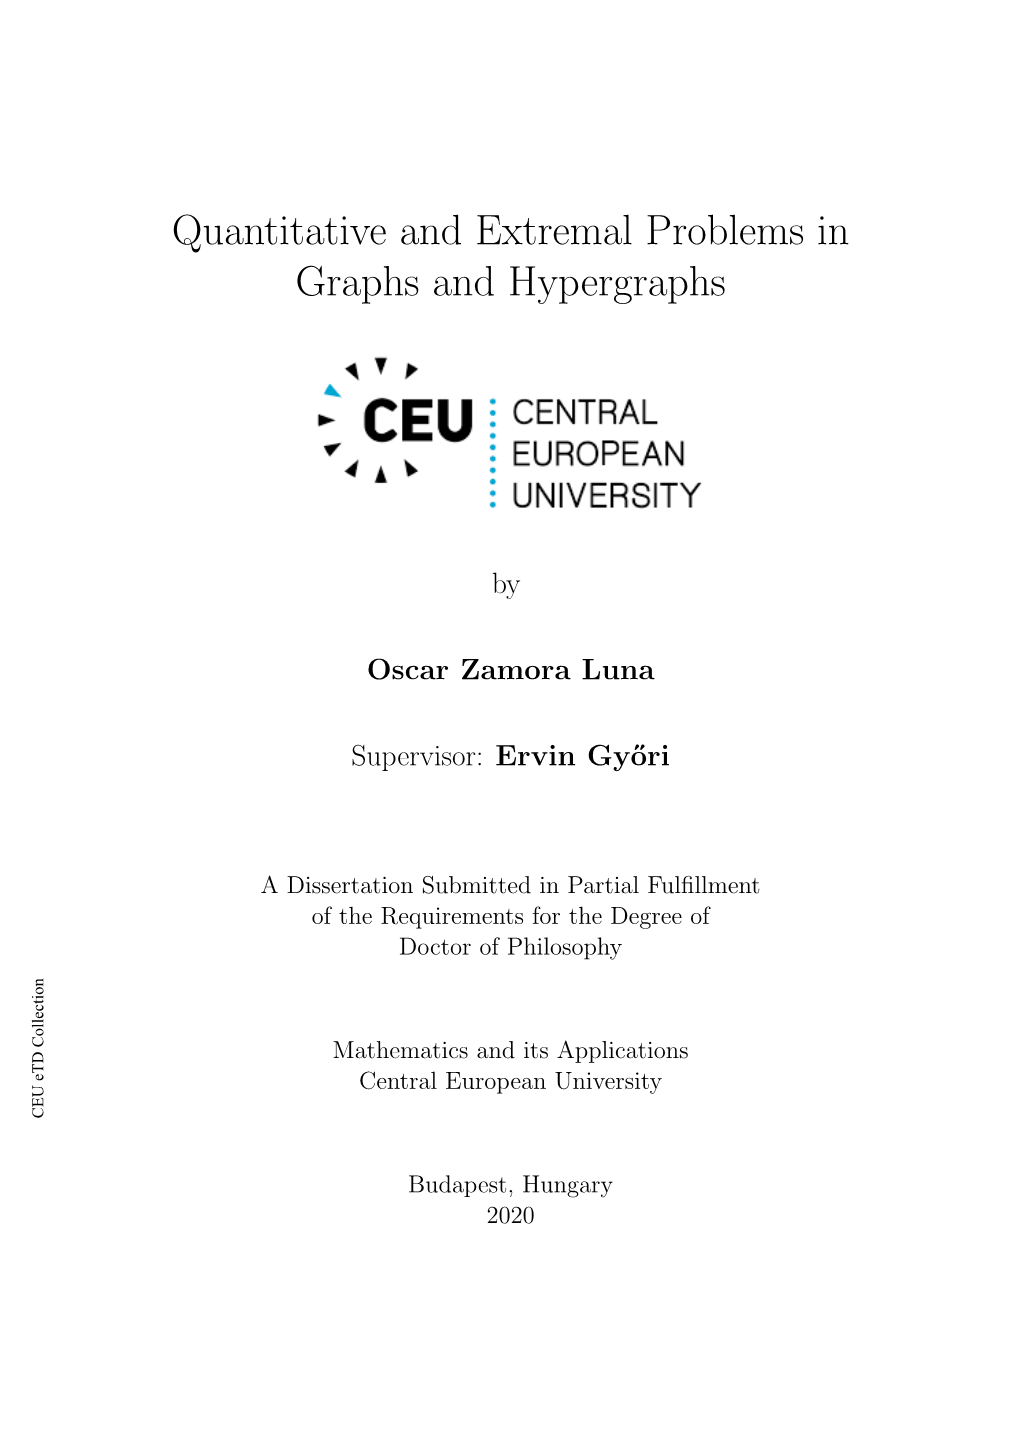 Quantitative and Extremal Problems in Graphs and Hypergraphs